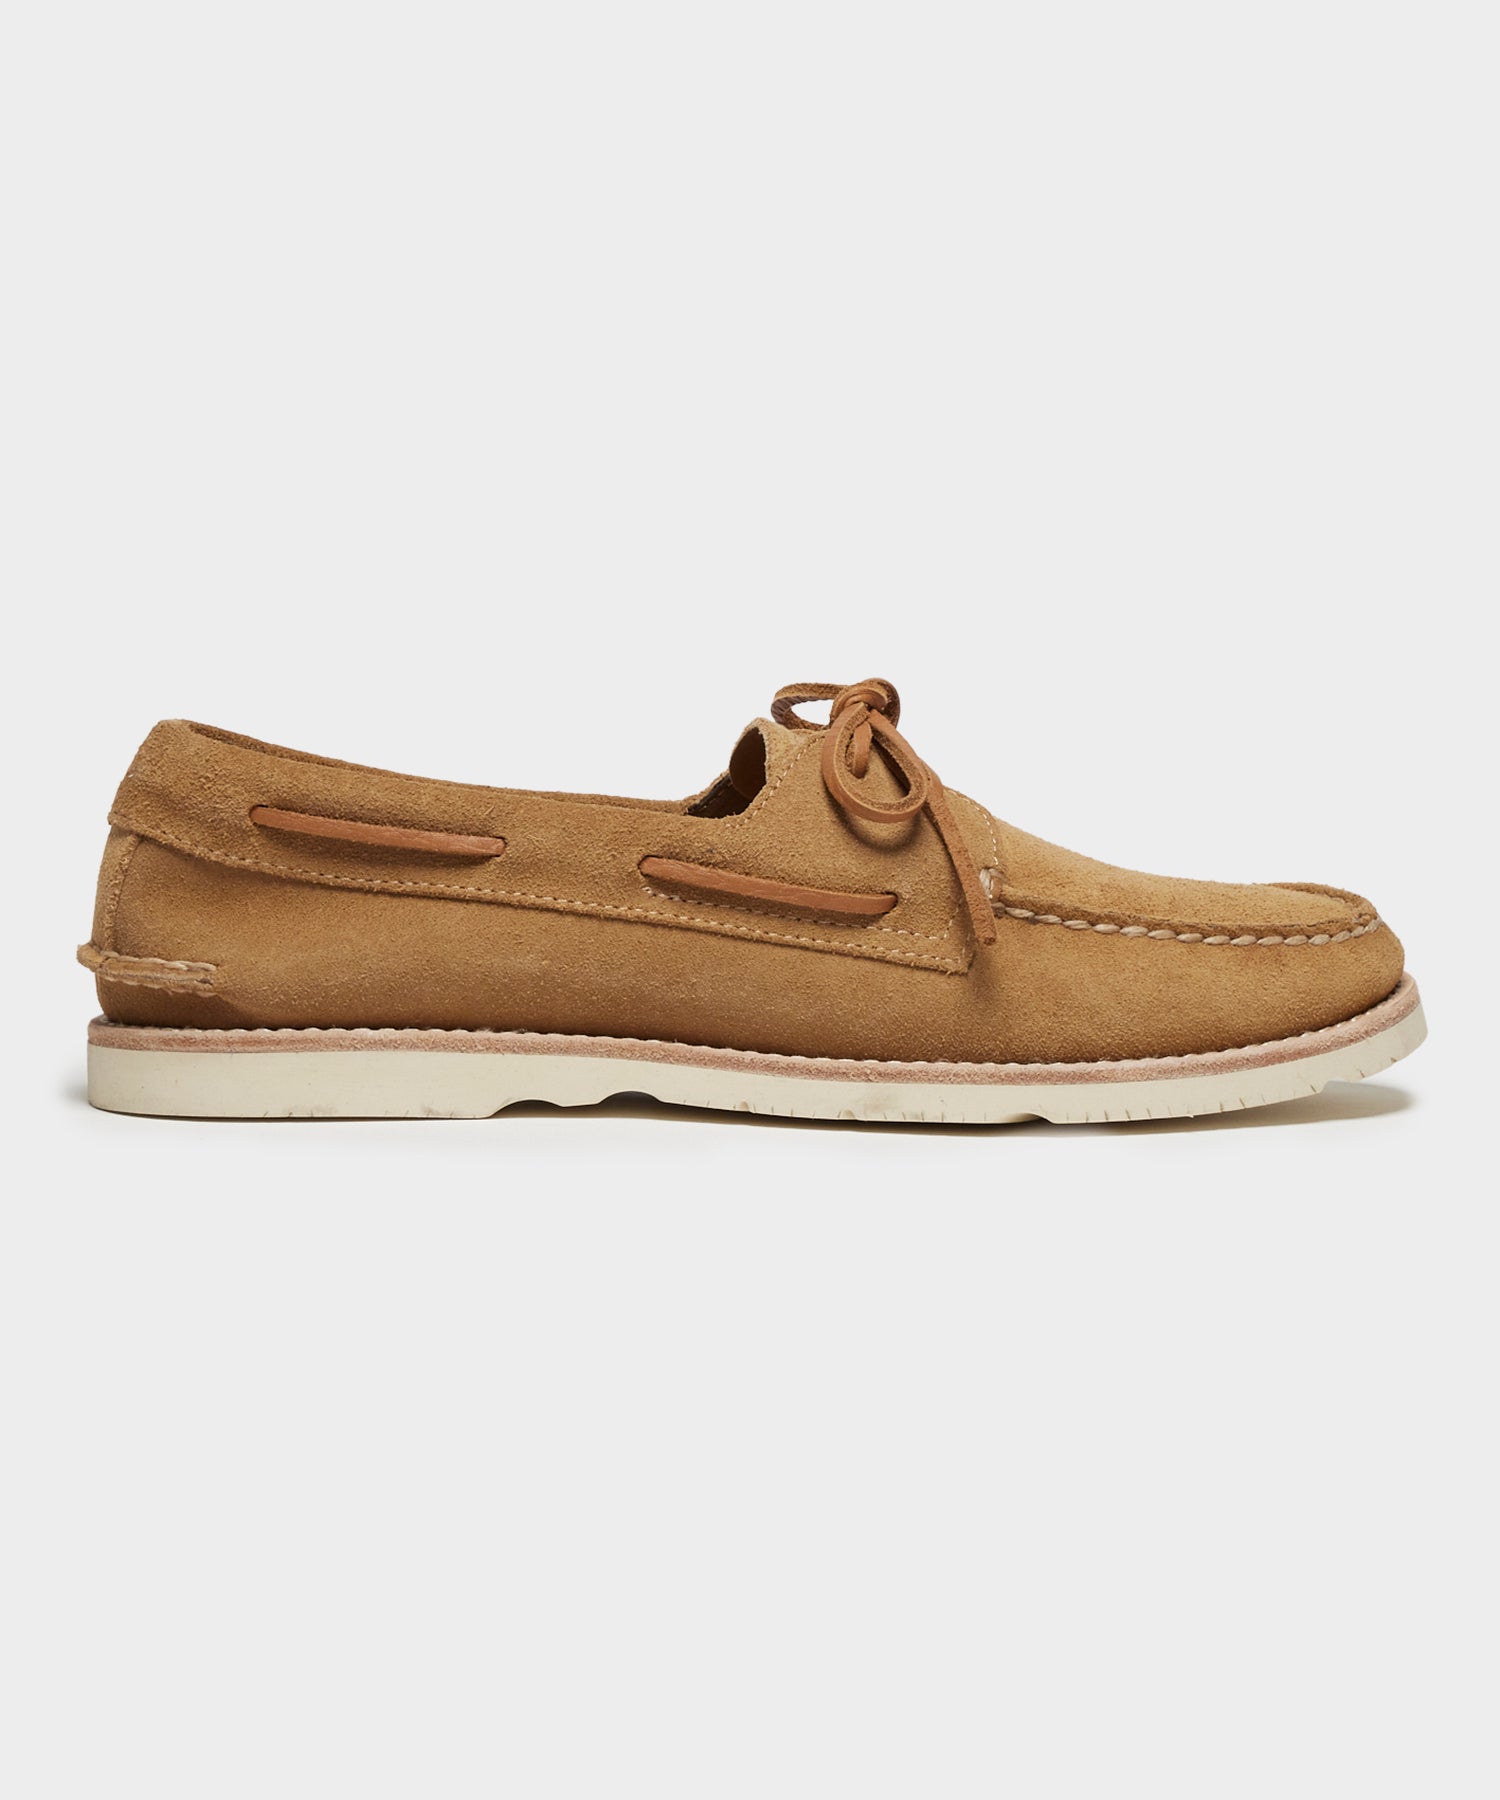 Todd Snyder X Sperry Top-Sider Suede Boat Shoe in Tan